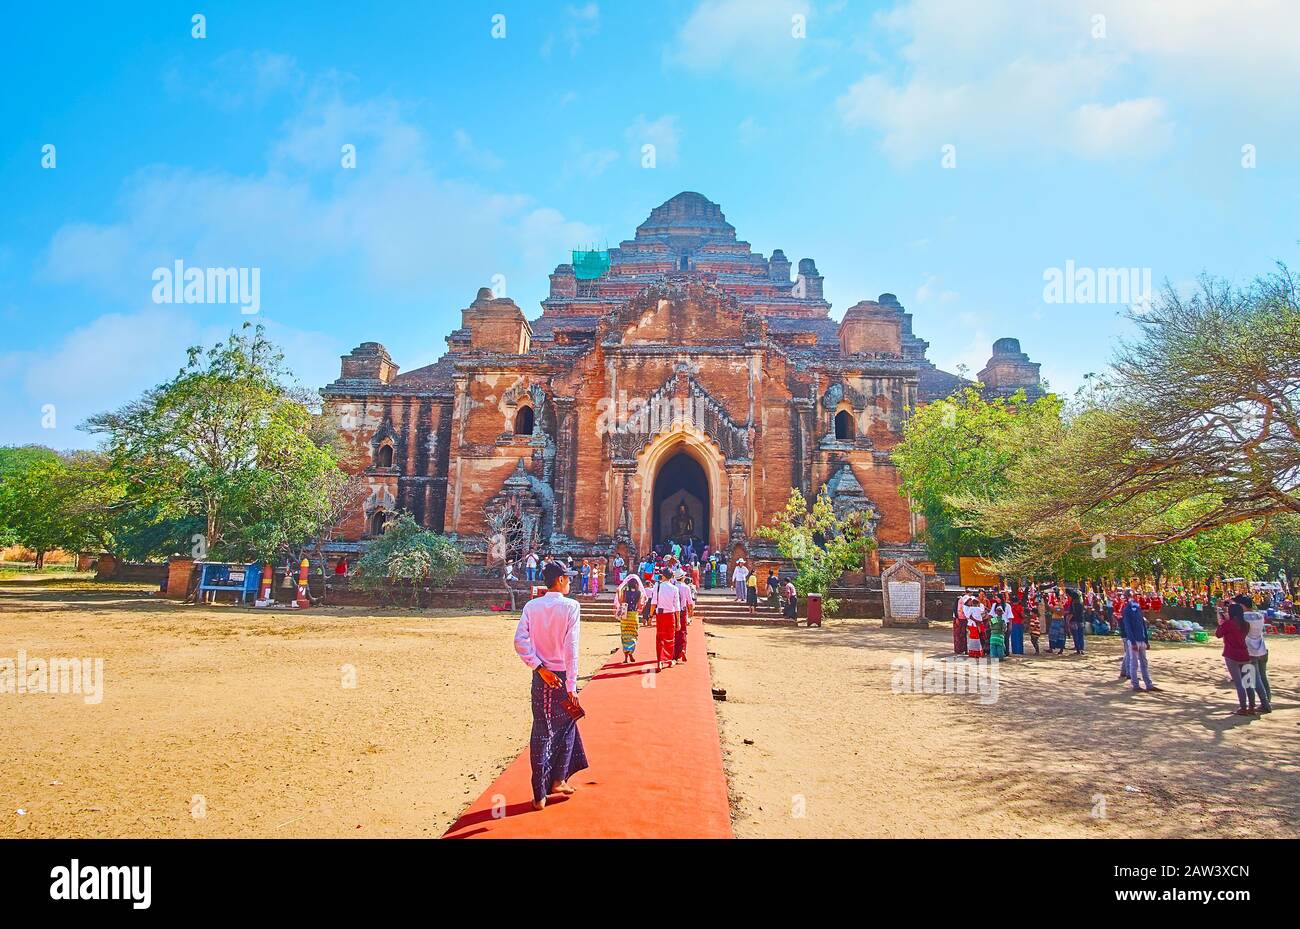 BAGAN, MYANMAR - FEBRUARY 25, 2018:  The red carpet leads to the main entrance of Dhammayangyi Pagoda - the famous Buddhist temple and the largest in Stock Photo